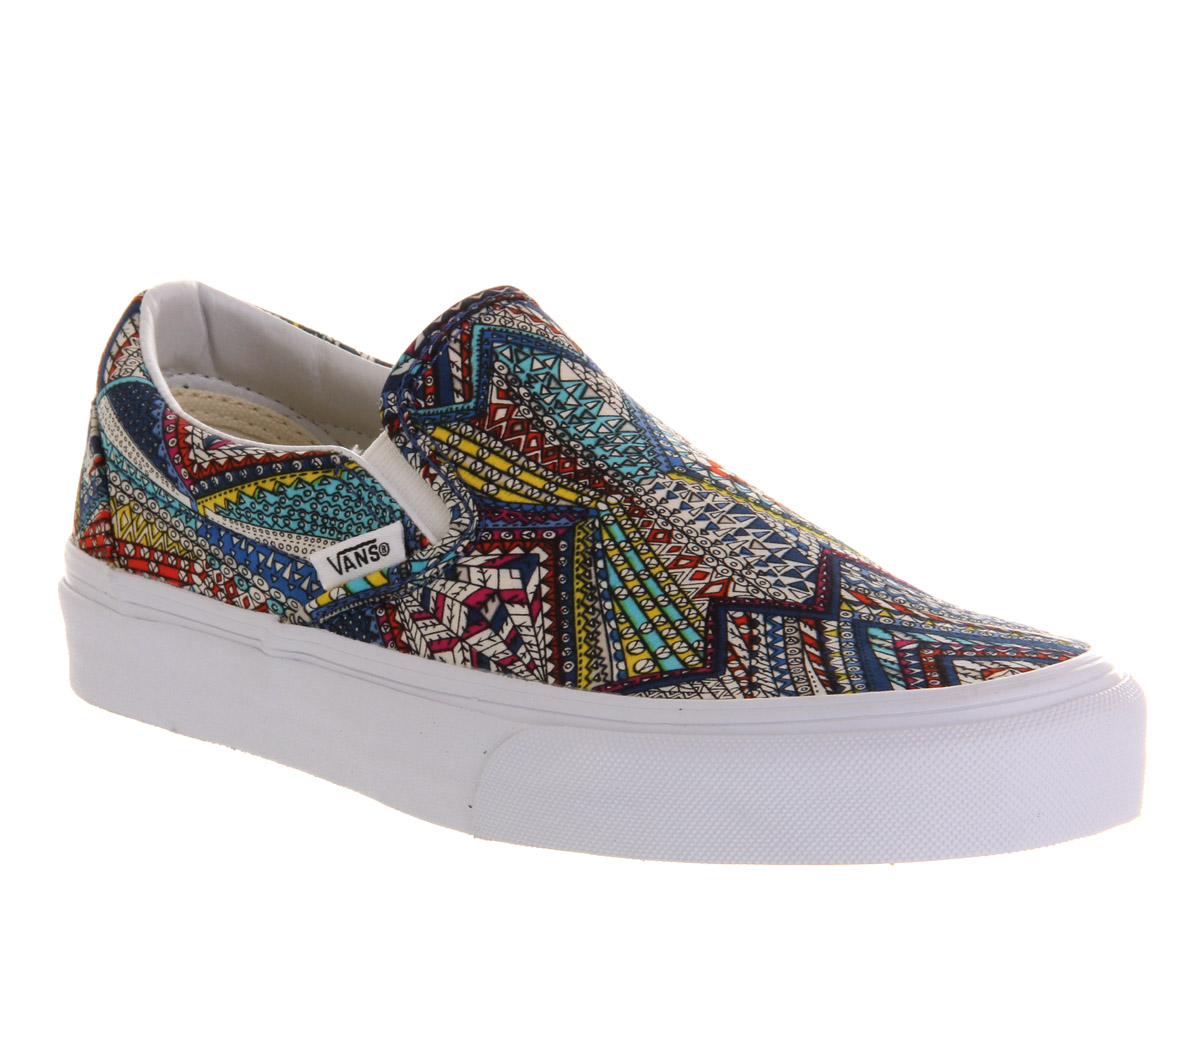 Vans Classic Slip On Shoes Abstract Multi - Unisex Sports